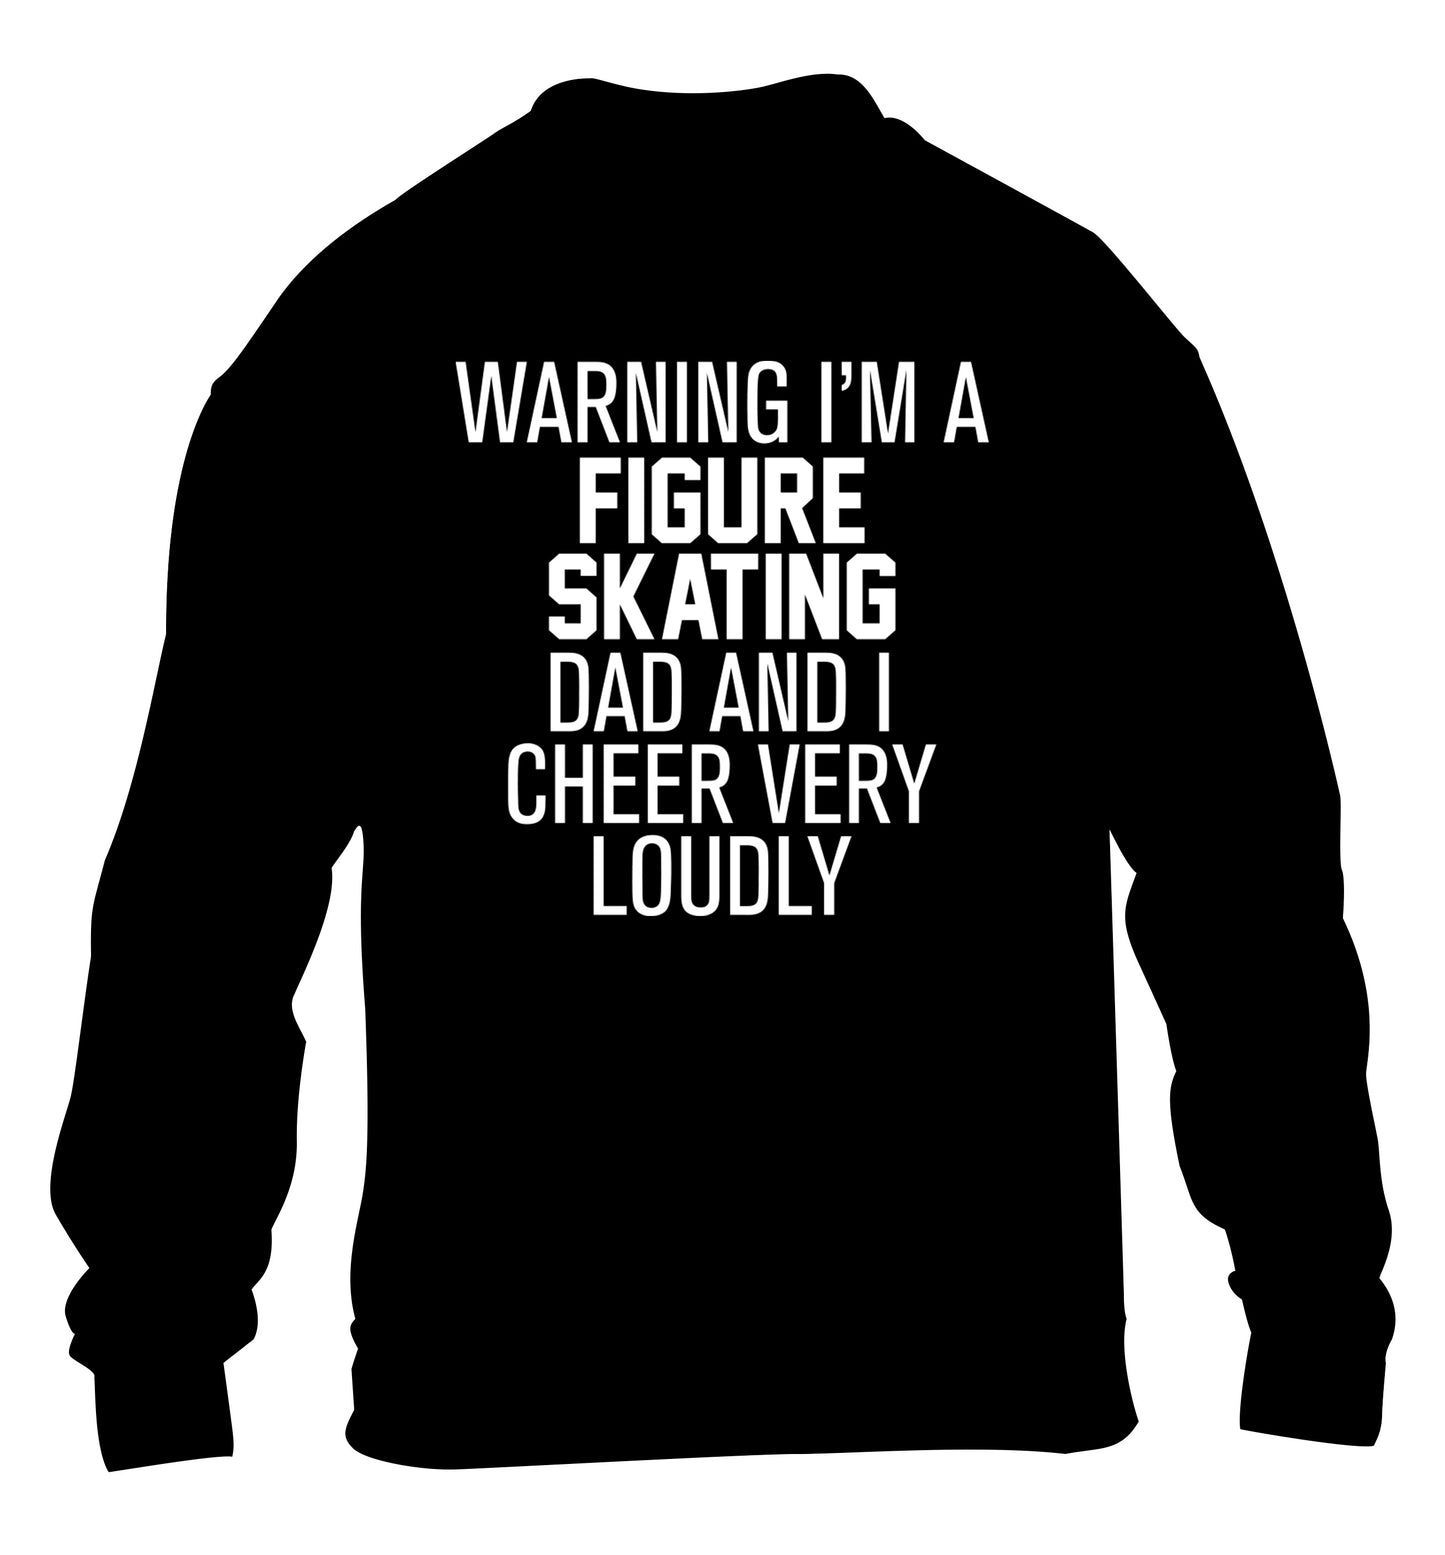 Warning I'm a figure skating dad and I cheer very loudly children's black sweater 12-14 Years